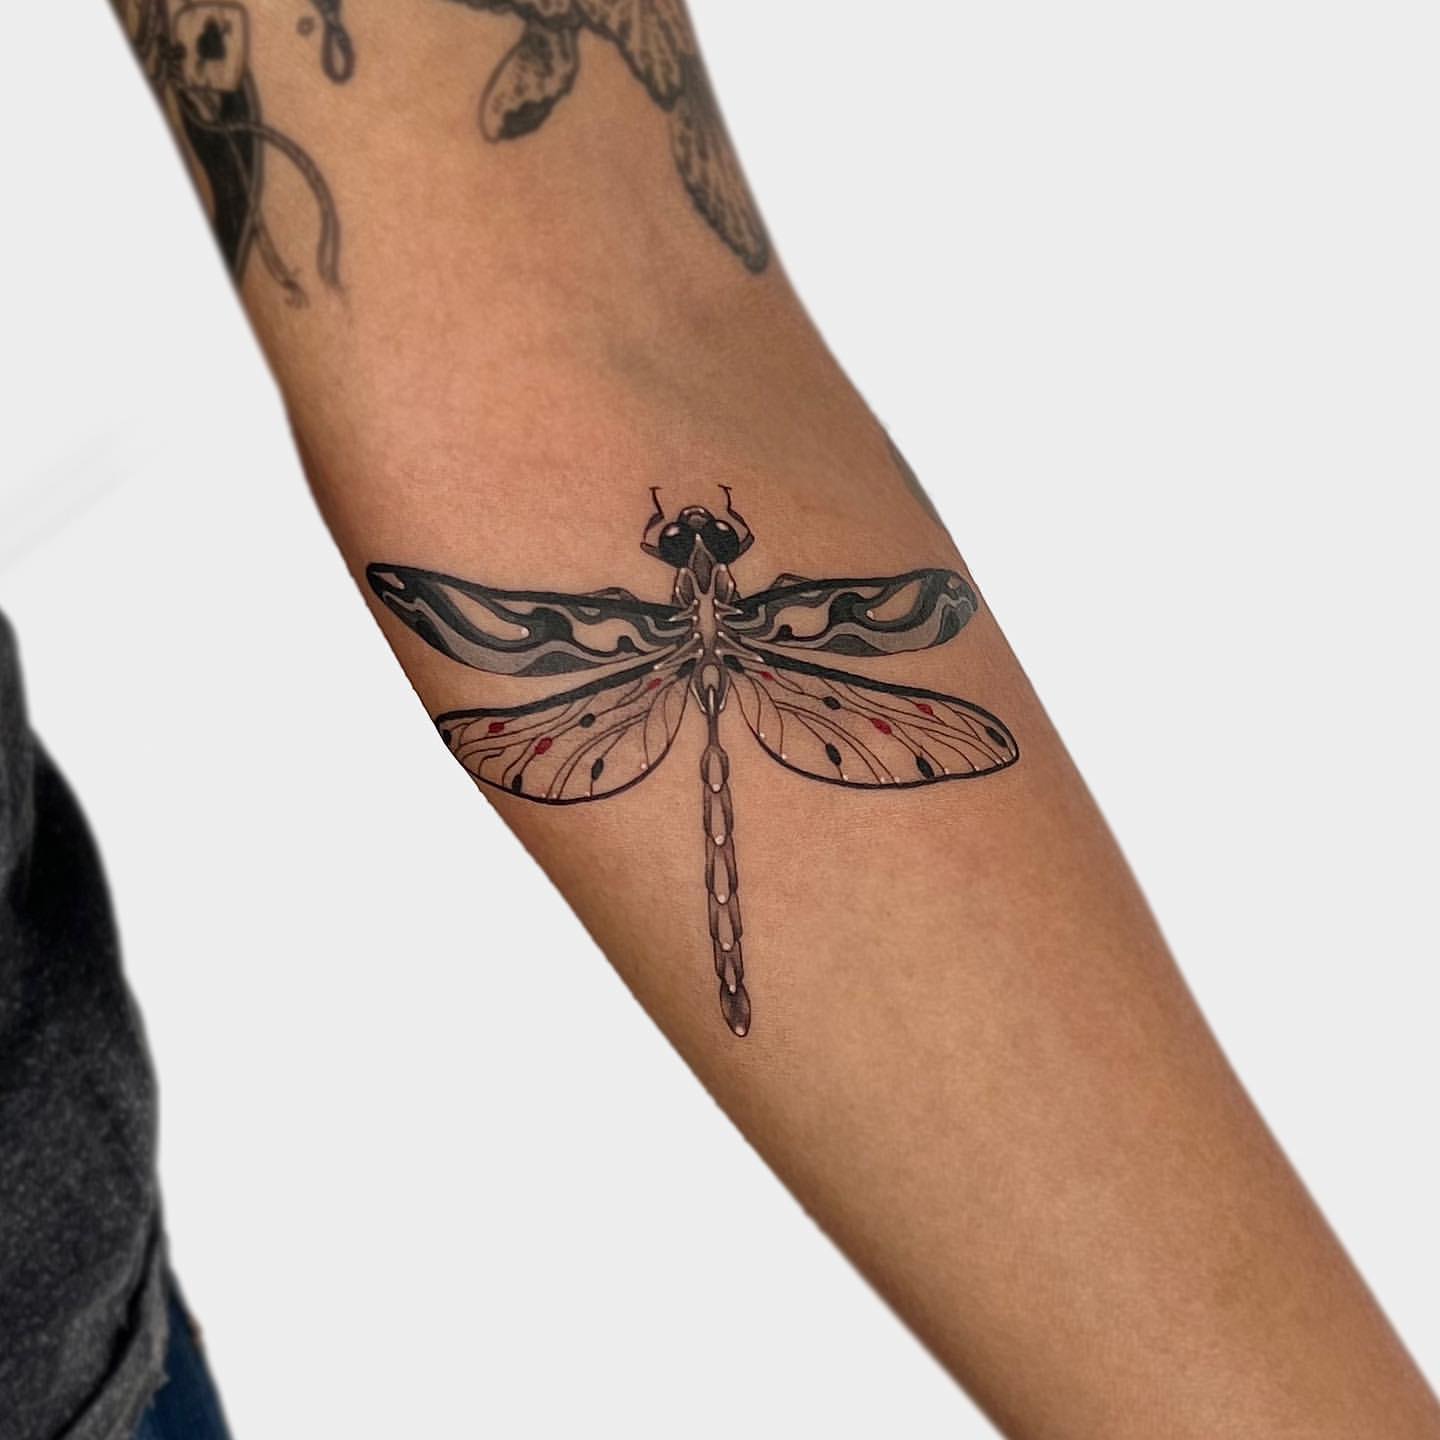 30 Incredibly Interesting Insect Tattoo Ideas for Men & Women in 2023